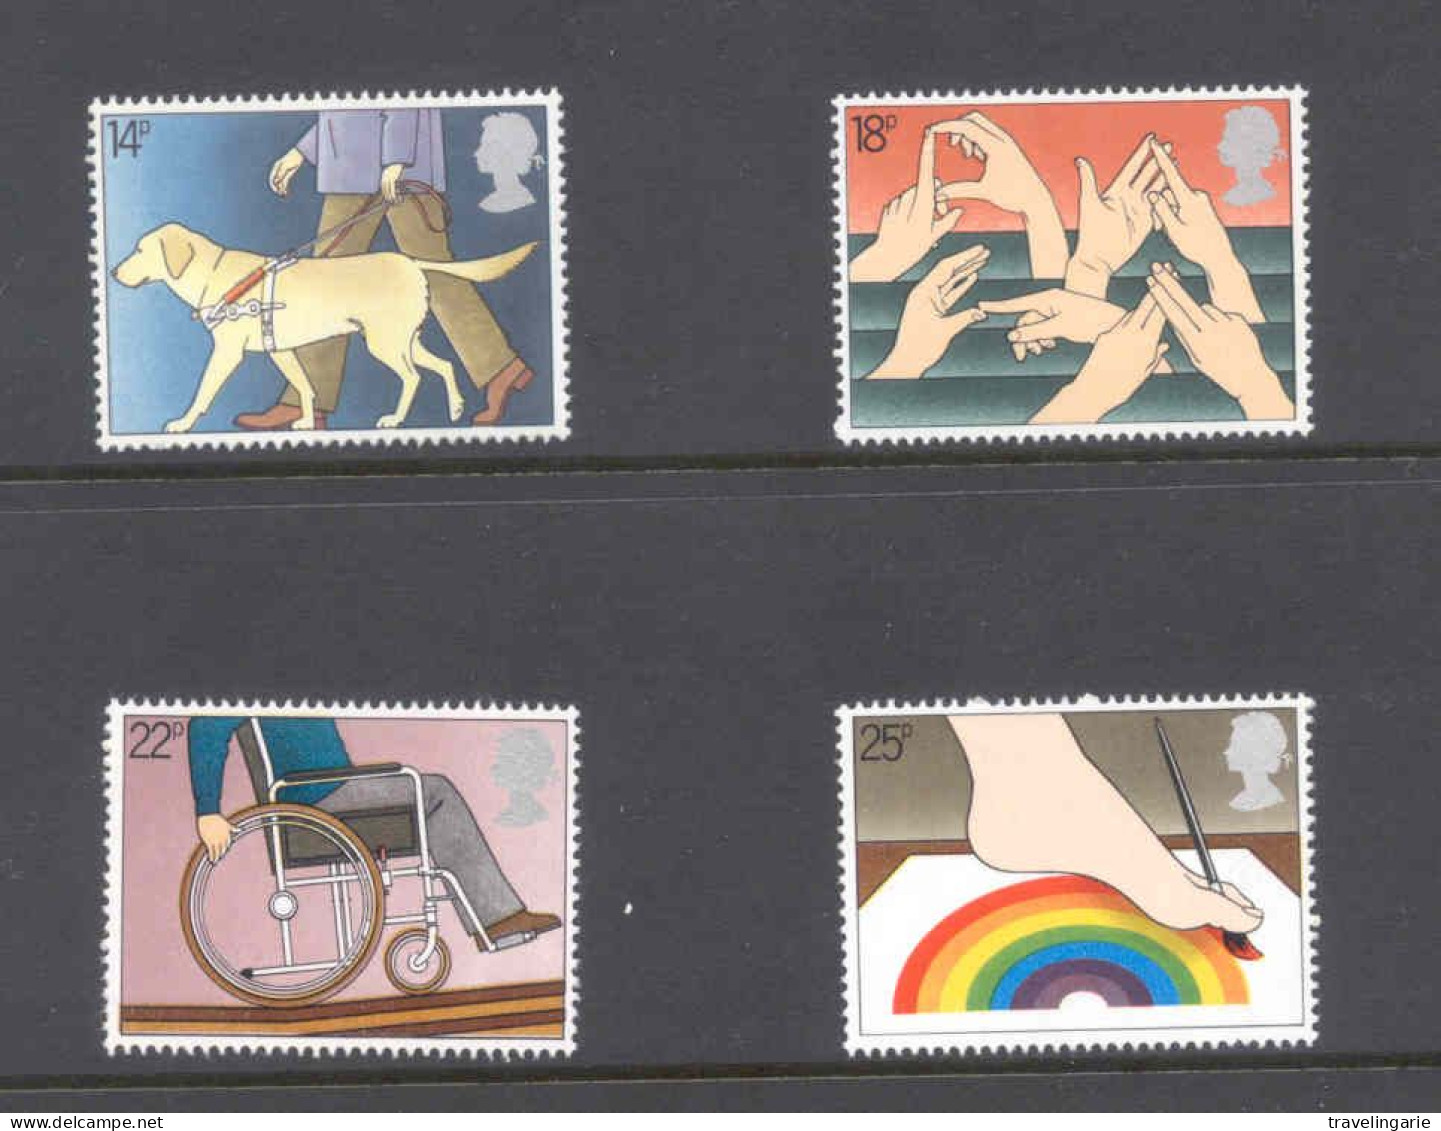 Great-Britain 1981 International Year Of The Disabled With Guide Dog MNH ** - Dogs